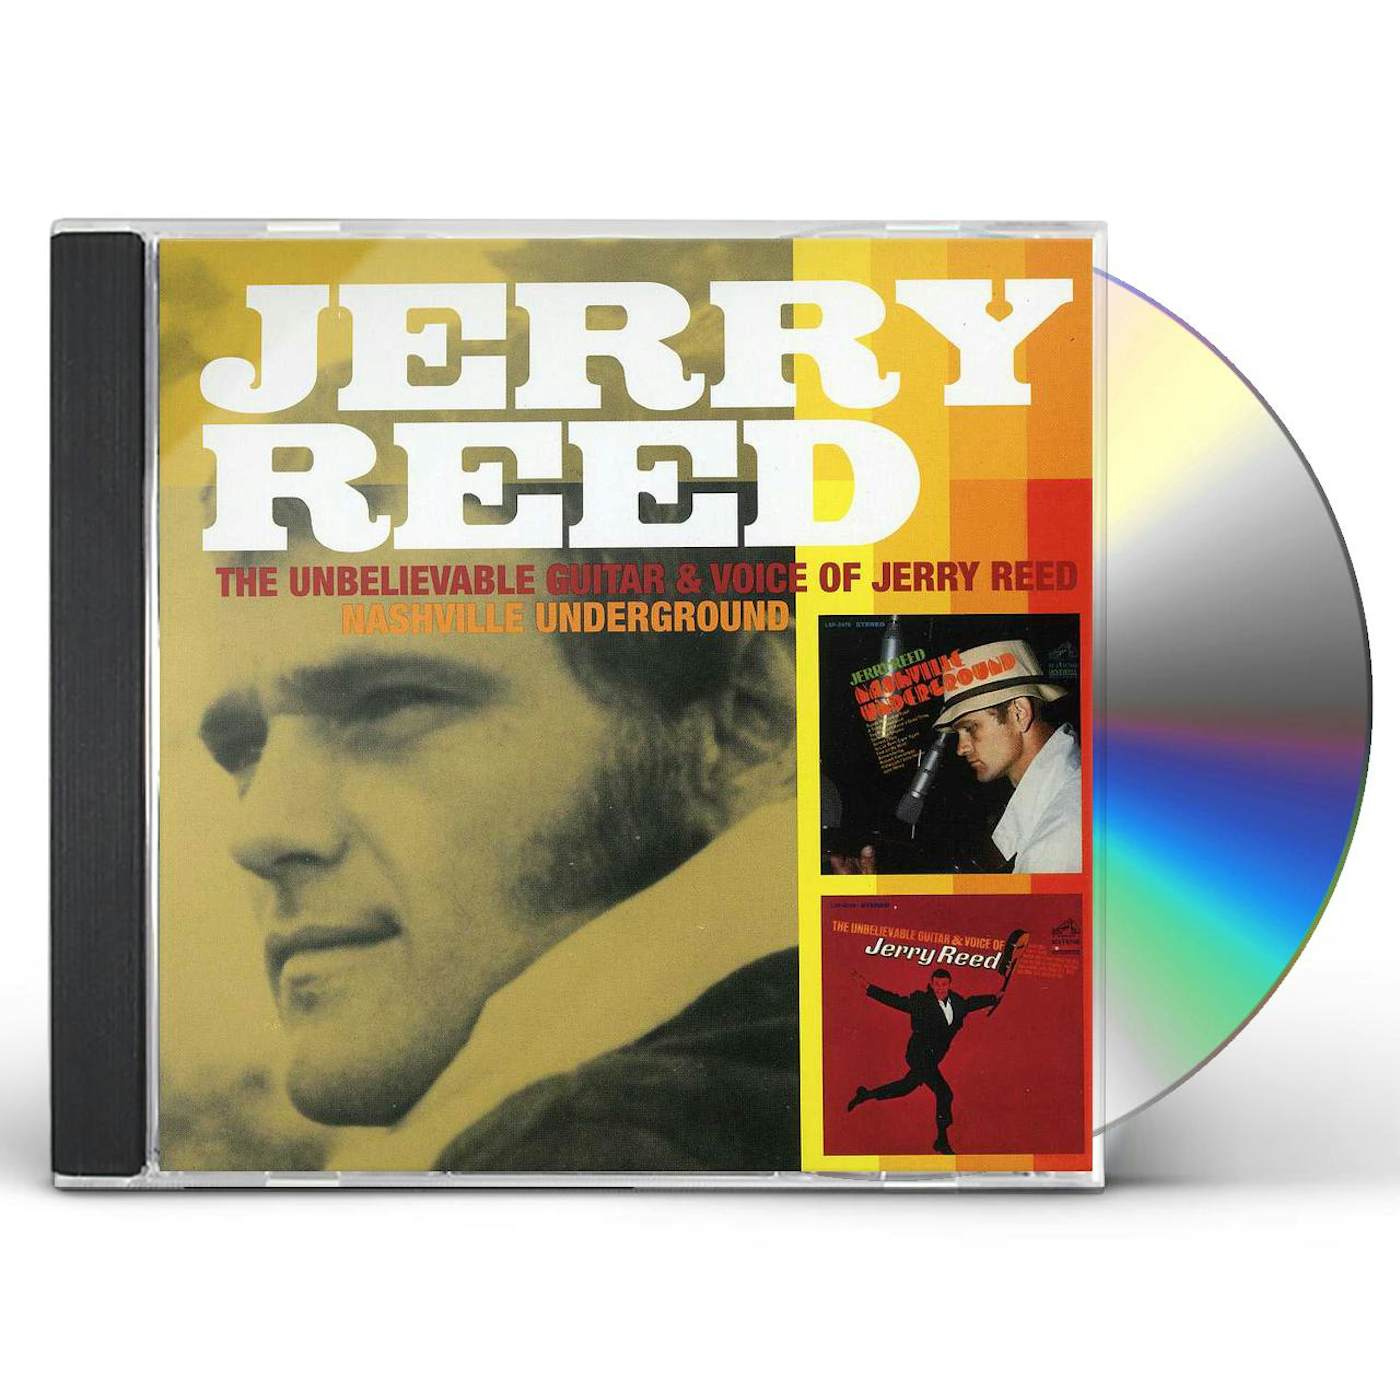 UNBELIEVABLE VOICE & GUITAR OF JERRY REED CD